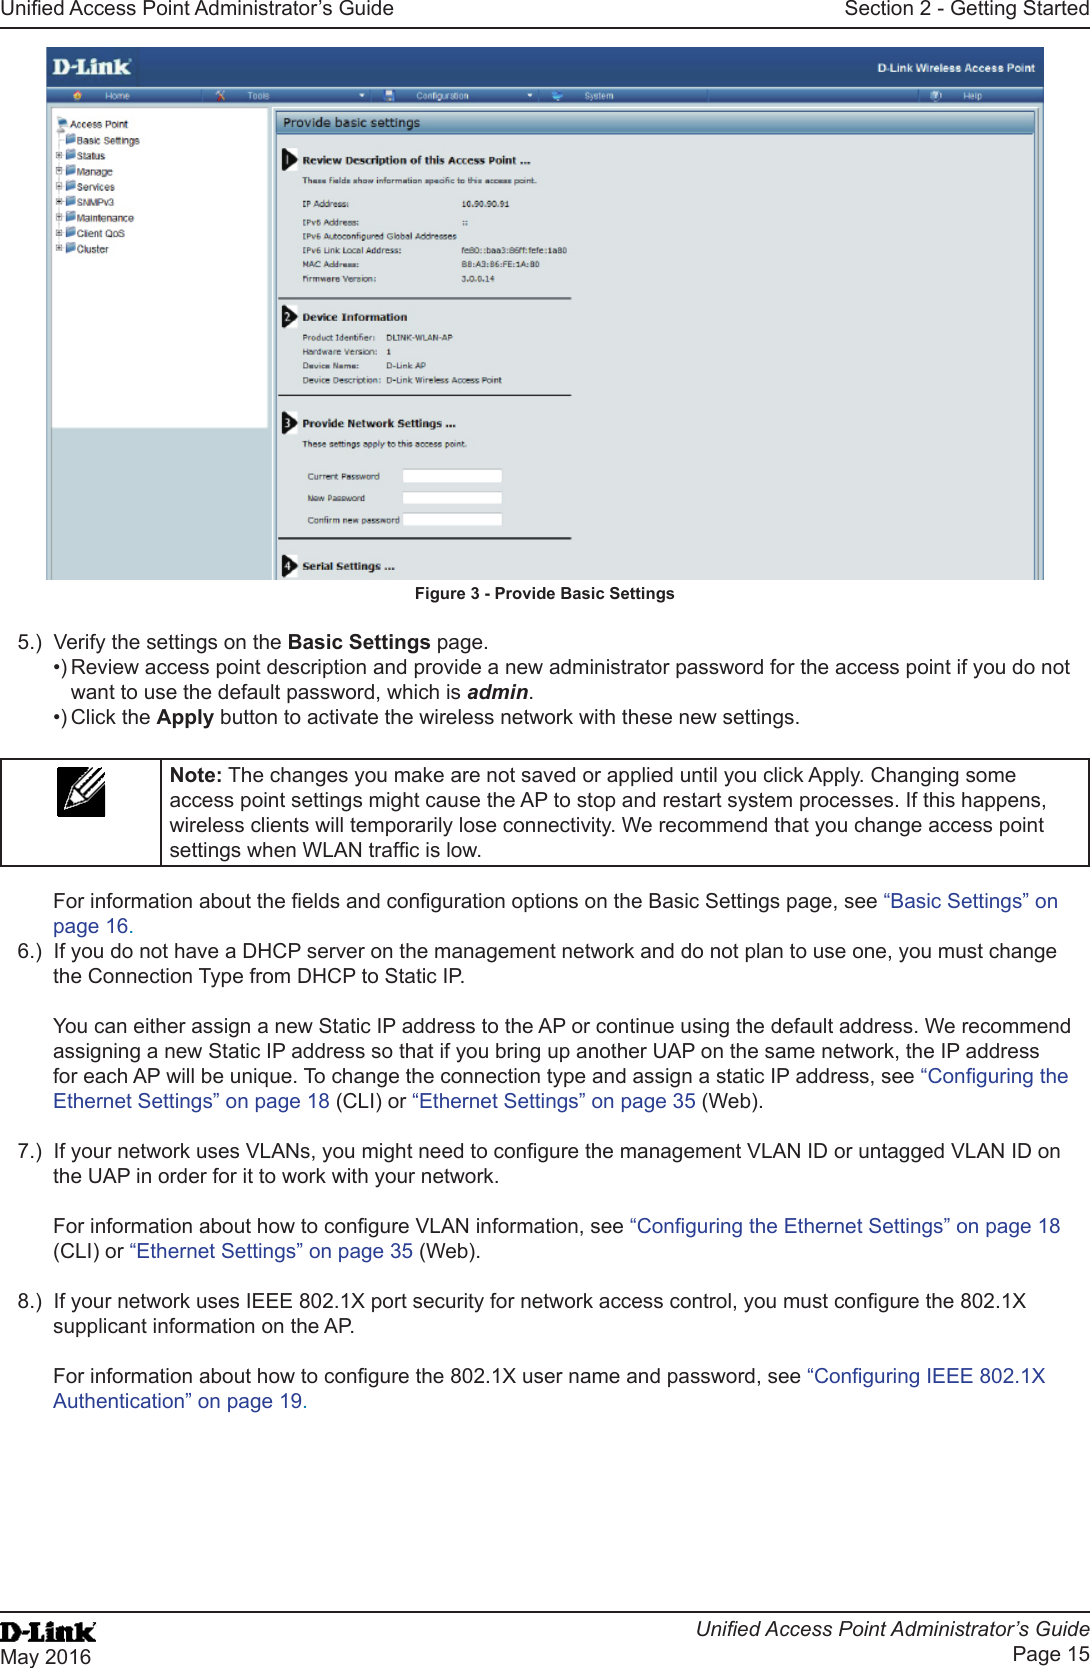 Unied Access Point Administrator’s GuideUnied Access Point Administrator’s GuidePage 15May 2016Section 2 - Getting StartedFigure 3 - Provide Basic Settings5.)  Verify the settings on the Basic Settings page.•) Review access point description and provide a new administrator password for the access point if you do not want to use the default password, which is admin.•) Click the Apply button to activate the wireless network with these new settings. Note: The changes you make are not saved or applied until you click Apply. Changing some access point settings might cause the AP to stop and restart system processes. If this happens, wireless clients will temporarily lose connectivity. We recommend that you change access point settings when WLAN trafc is low. For information about the elds and conguration options on the Basic Settings page, see “Basic Settings” on page 16.6.)  If you do not have a DHCP server on the management network and do not plan to use one, you must change the Connection Type from DHCP to Static IP. You can either assign a new Static IP address to the AP or continue using the default address. We recommend assigning a new Static IP address so that if you bring up another UAP on the same network, the IP address for each AP will be unique. To change the connection type and assign a static IP address, see “Conguring the Ethernet Settings” on page 18 (CLI) or “Ethernet Settings” on page 35 (Web).7.)  If your network uses VLANs, you might need to congure the management VLAN ID or untagged VLAN ID on the UAP in order for it to work with your network. For information about how to congure VLAN information, see “Conguring the Ethernet Settings” on page 18 (CLI) or “Ethernet Settings” on page 35 (Web).8.)  If your network uses IEEE 802.1X port security for network access control, you must congure the 802.1X supplicant information on the AP.For information about how to congure the 802.1X user name and password, see “Conguring IEEE 802.1X Authentication” on page 19.